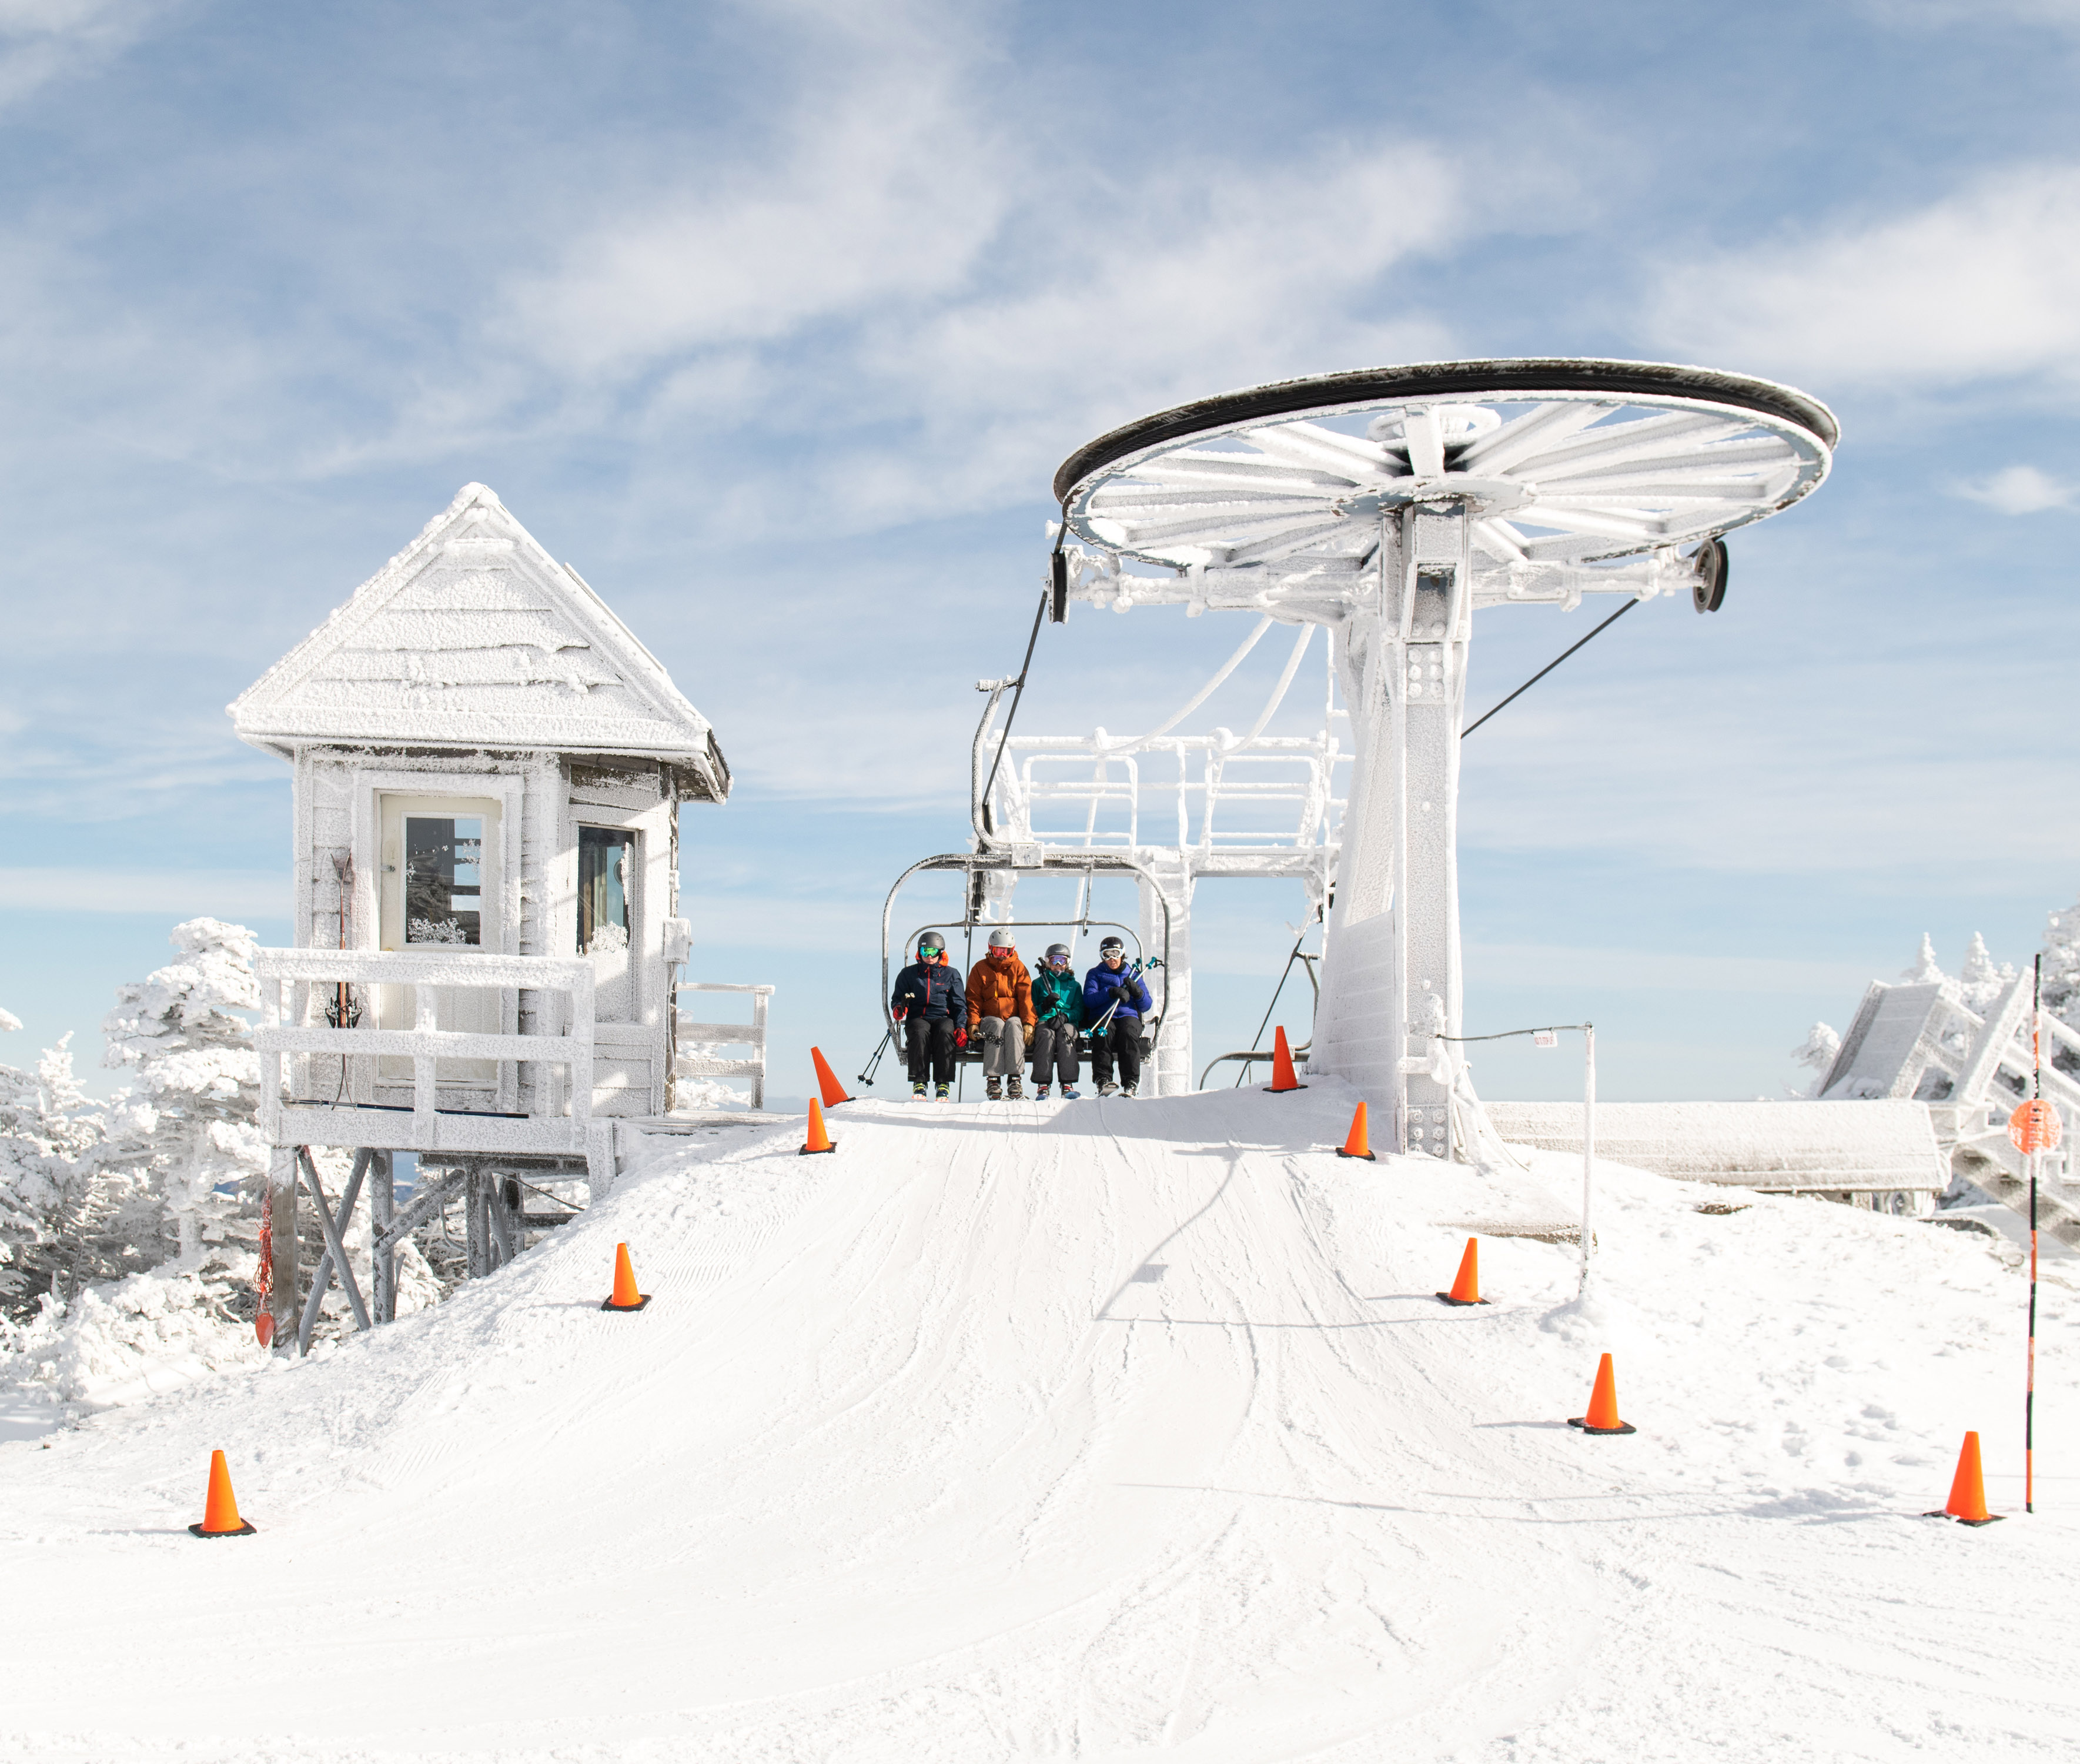 Students riding a ski lift covered in a fresh coat of snow